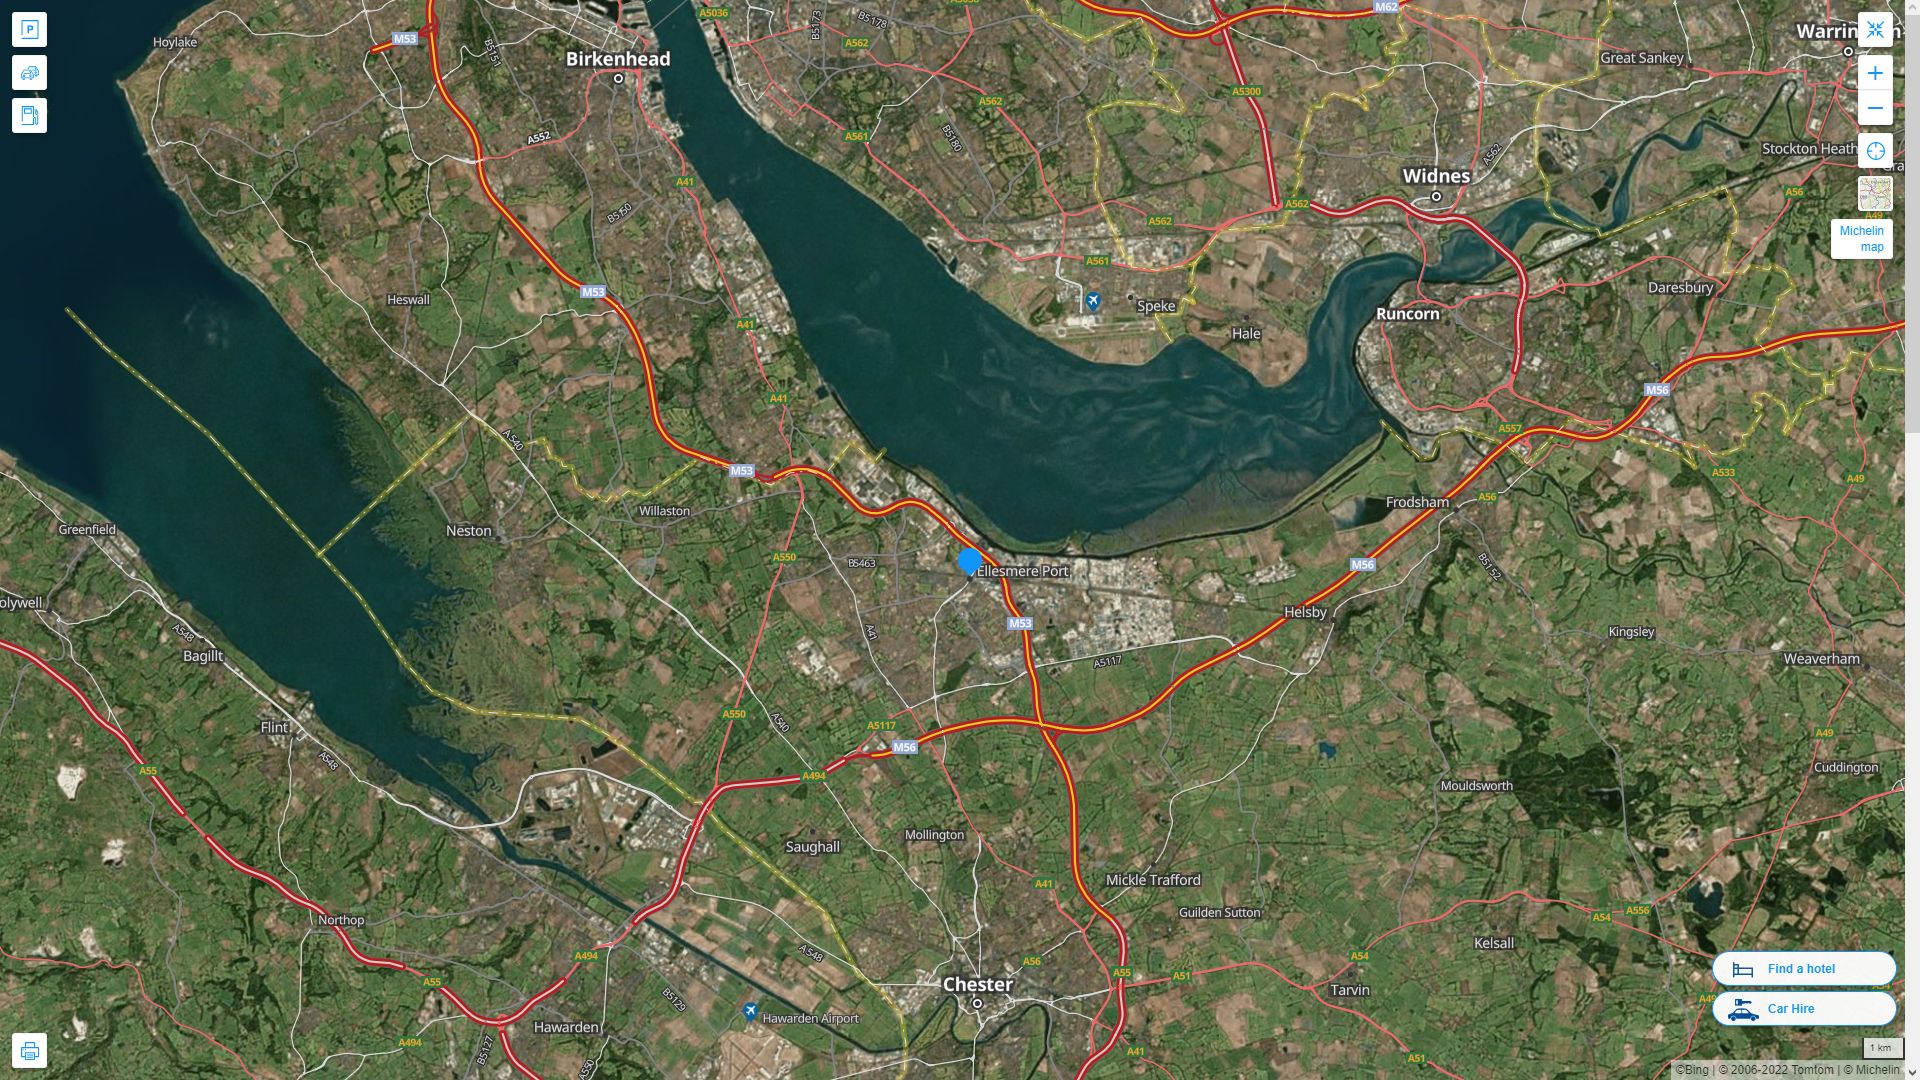 Ellesmere Port Highway and Road Map with Satellite View